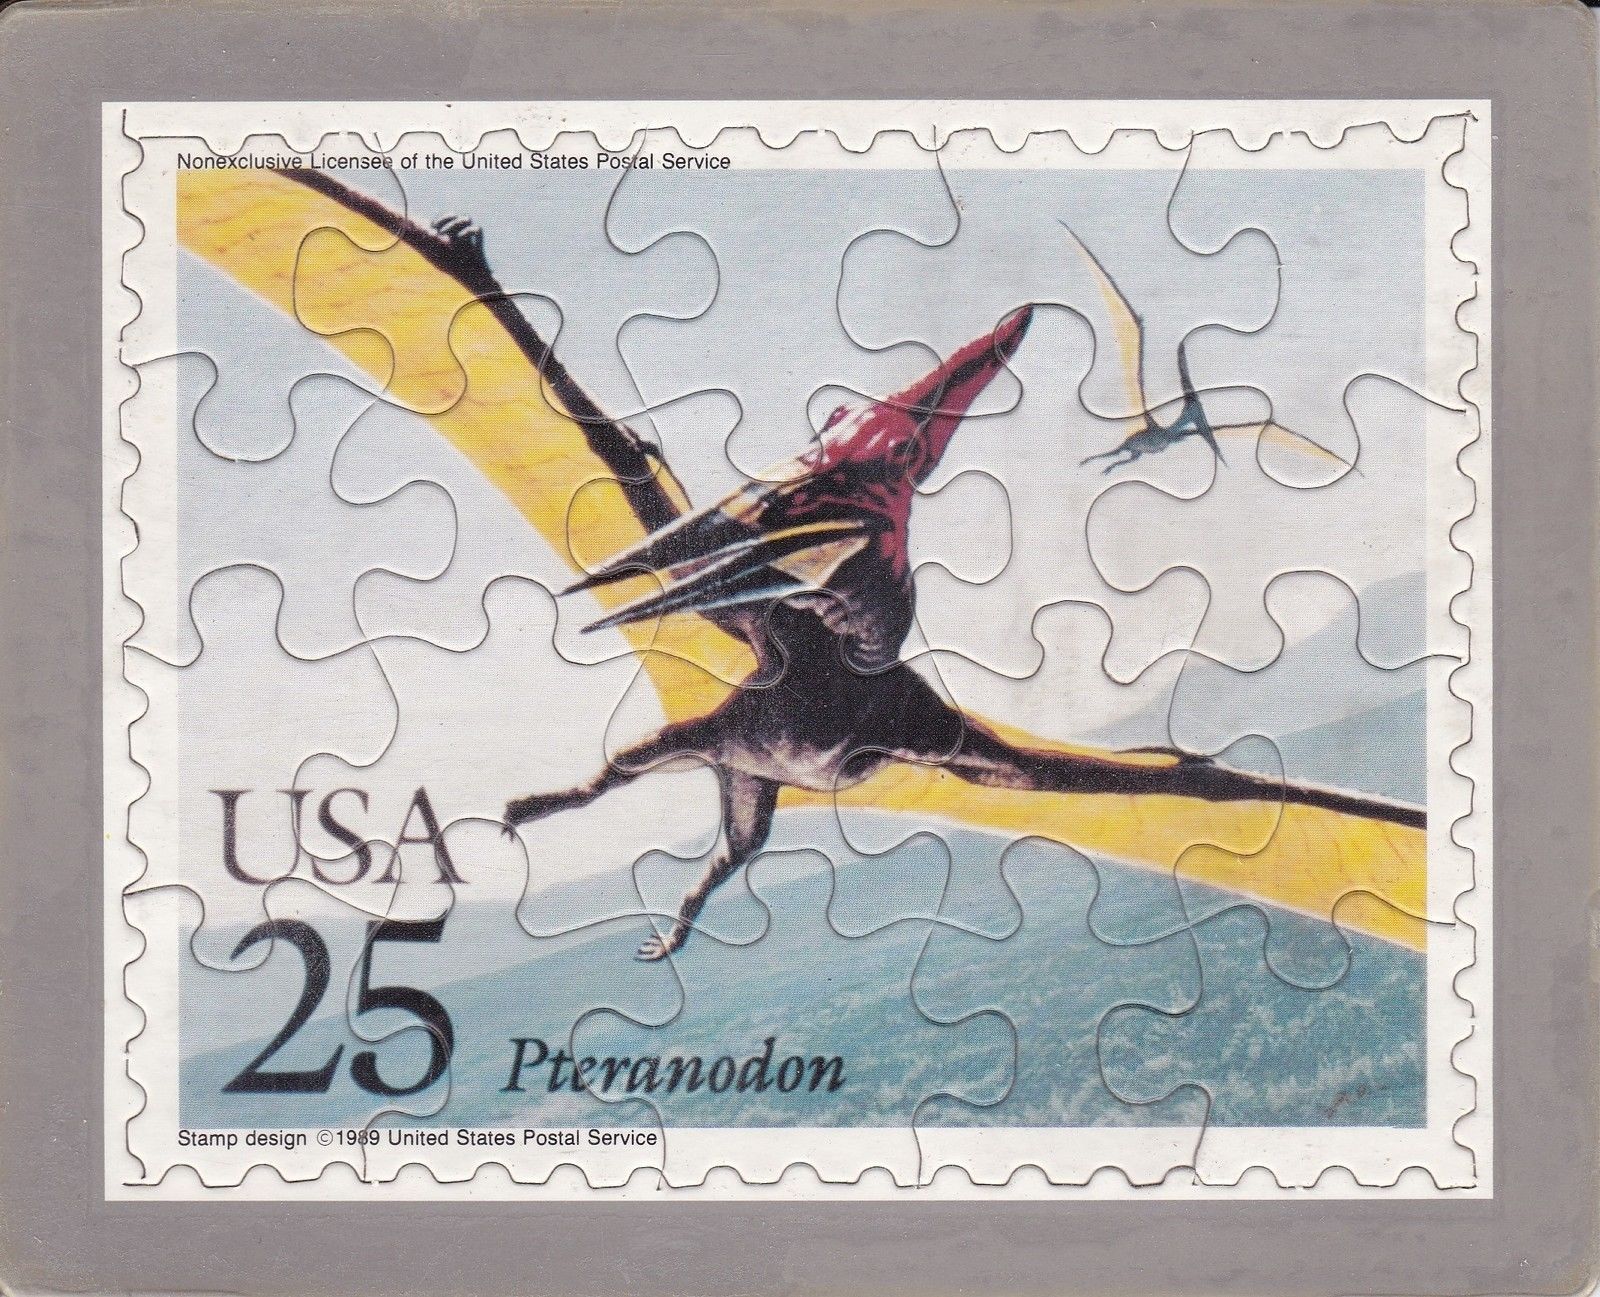 Primary image for USPS POSTCARD - Dinosaurs Commemorative Puzzle series -PTERANODON -FREE SHIPPING